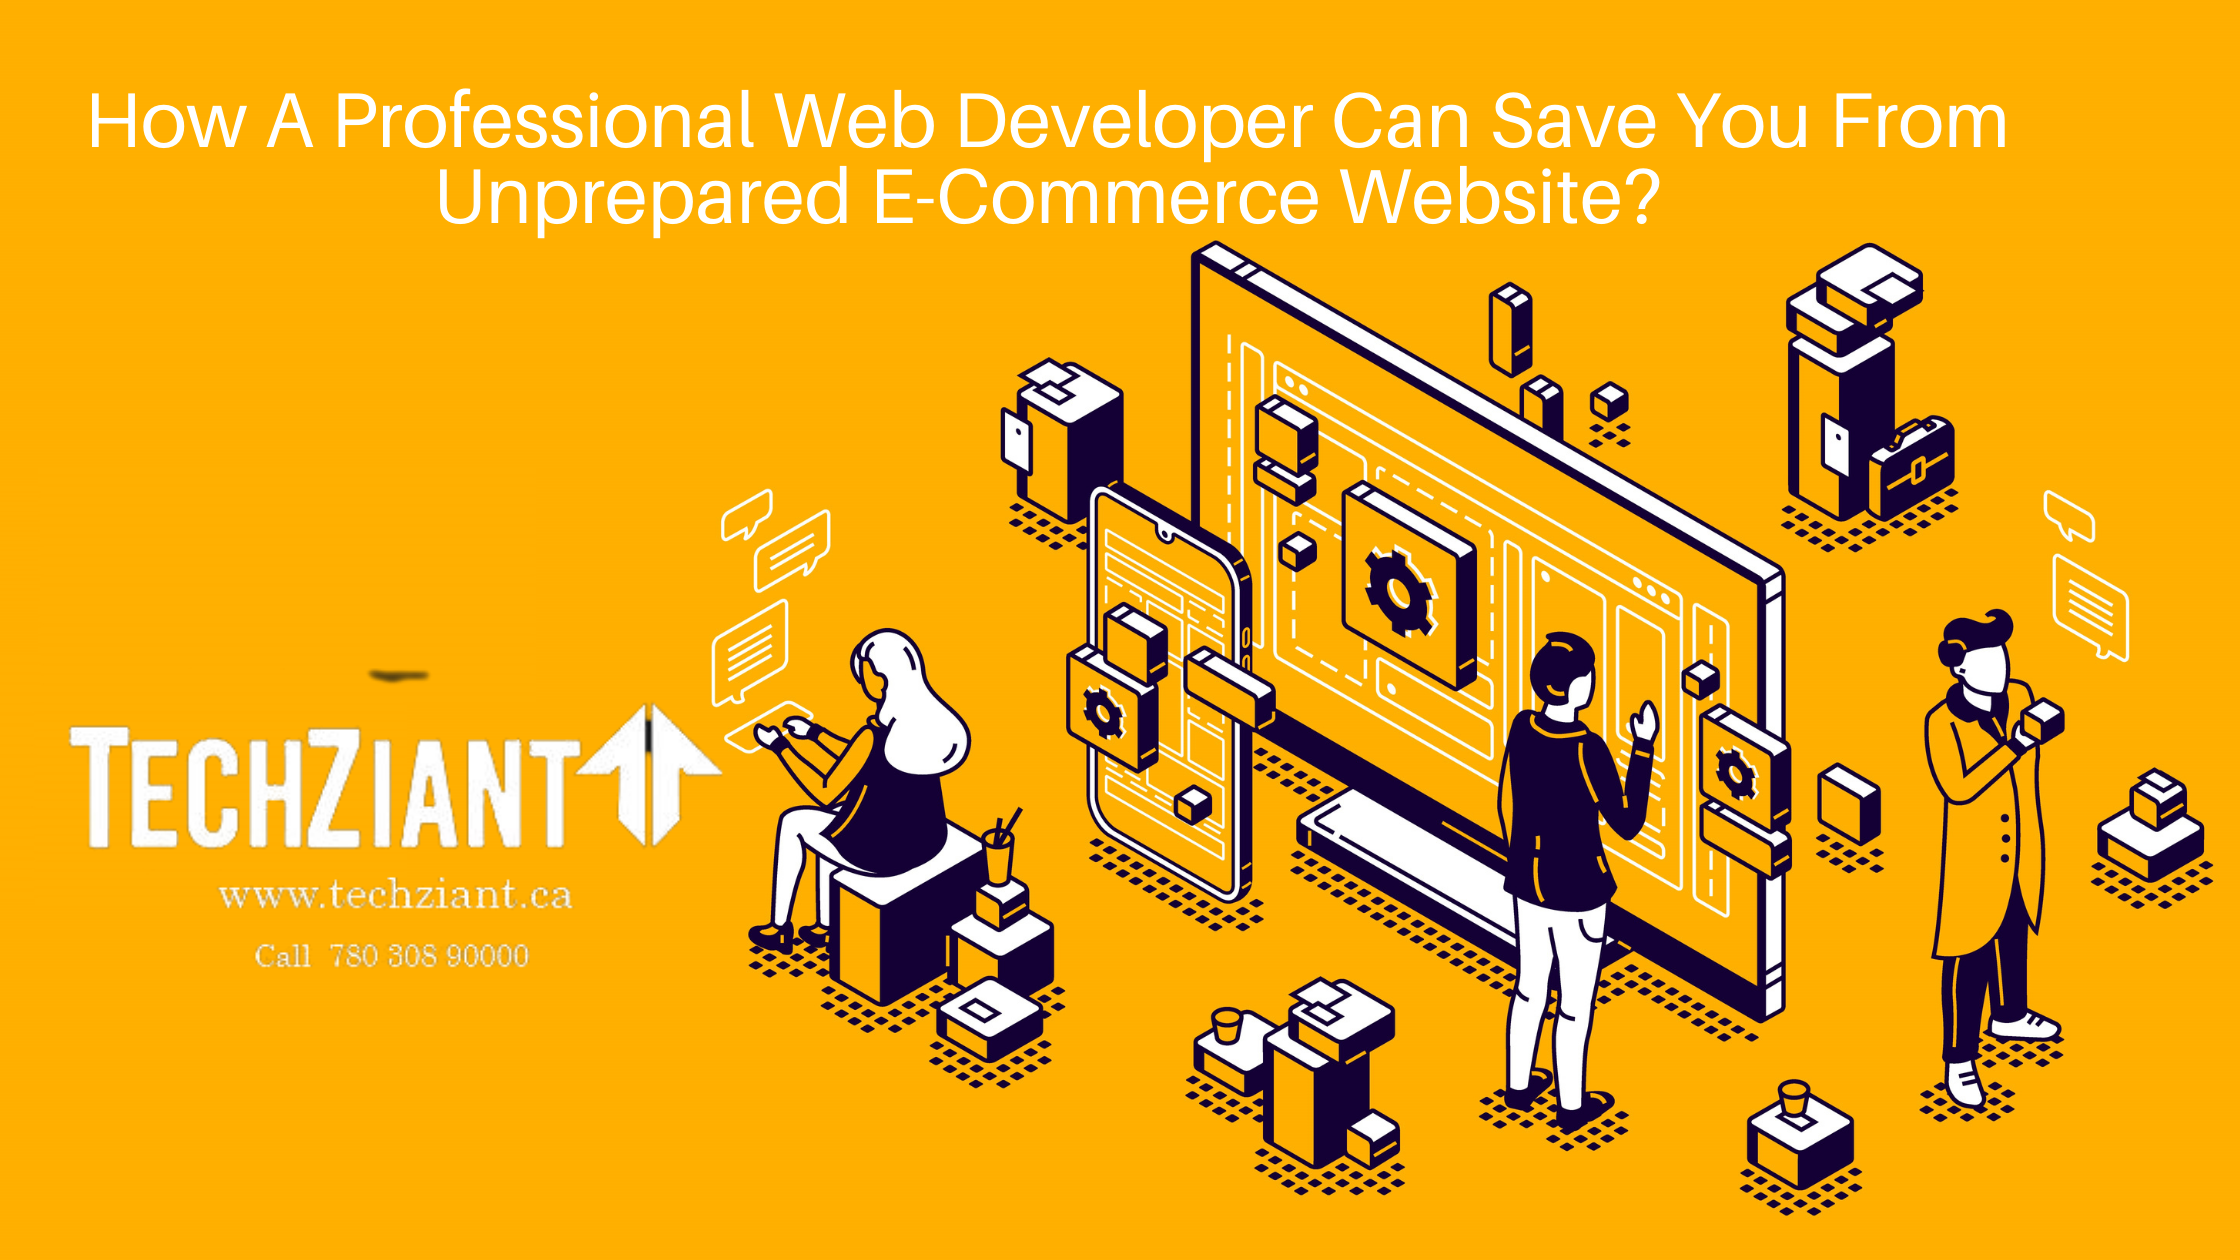 How A Professional Web Developer Can Save You From Unprepared E-Commerce Website?